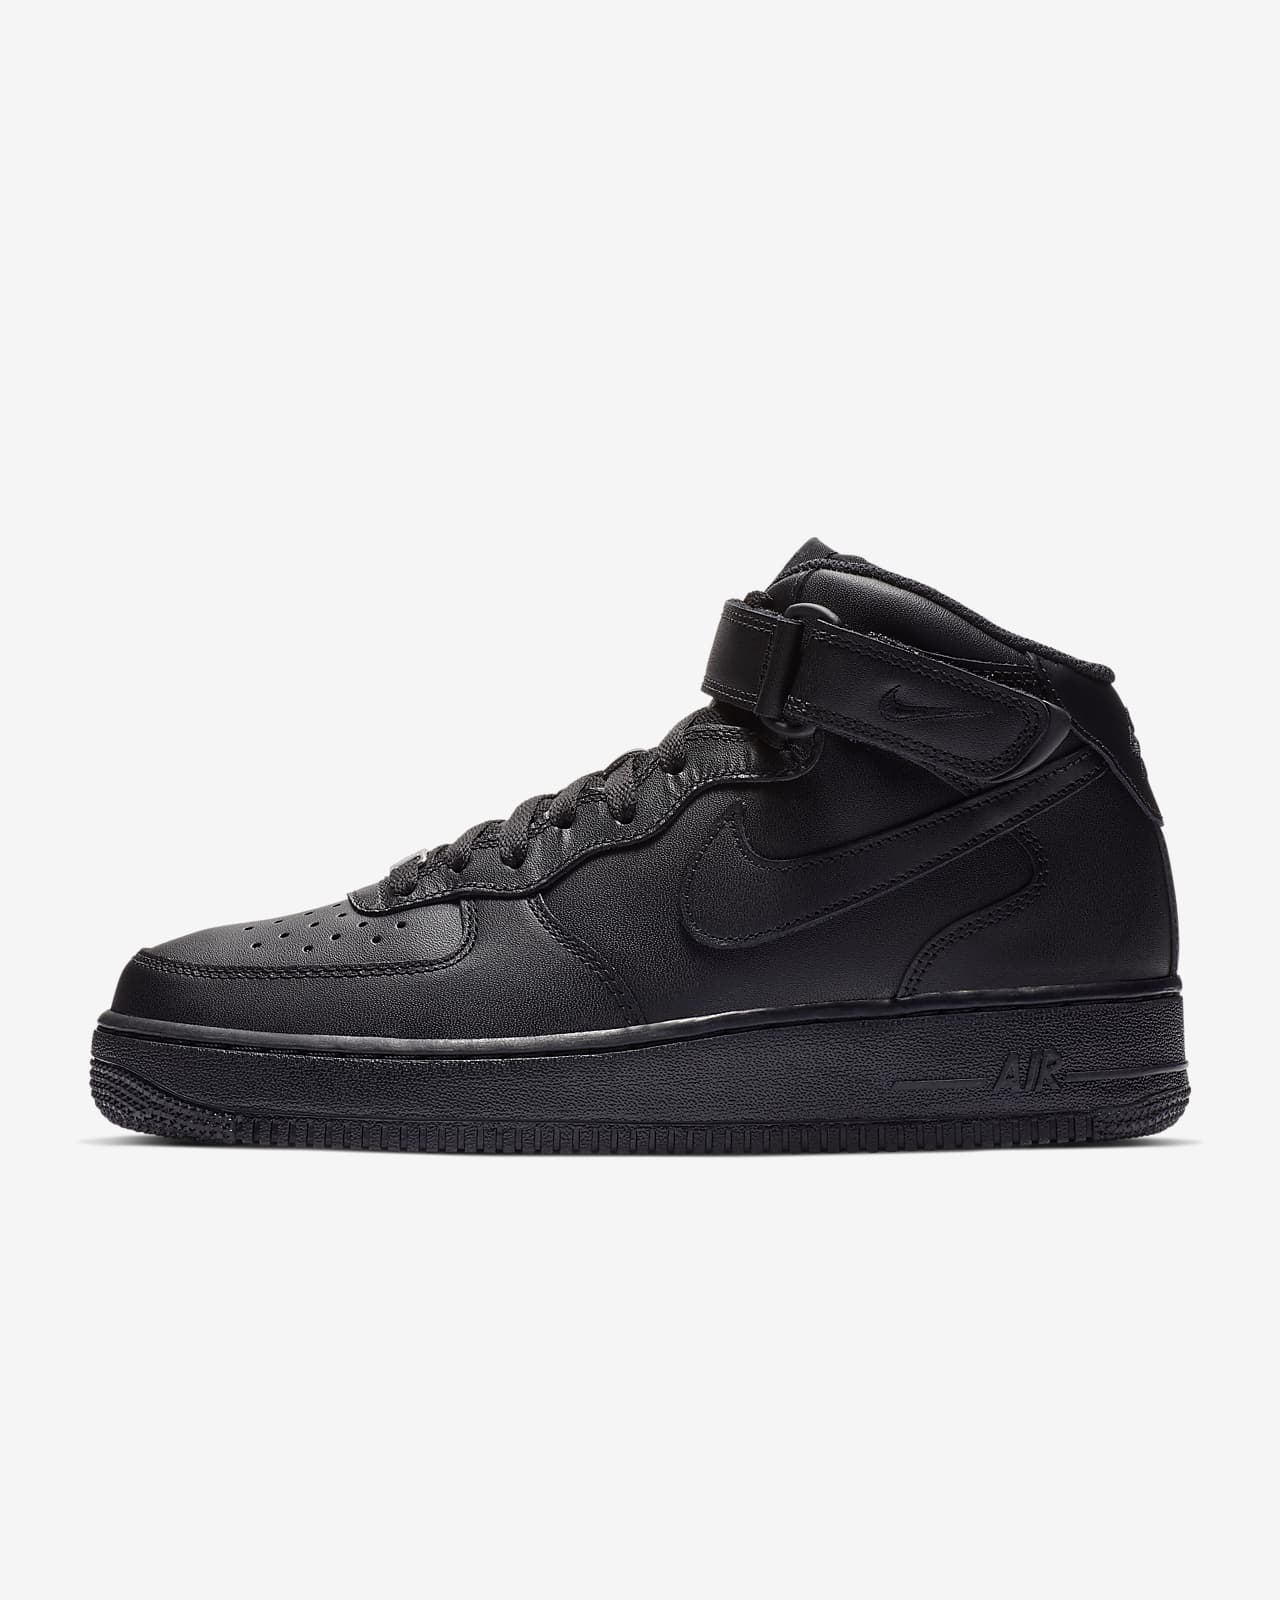 air force 1 07 mid